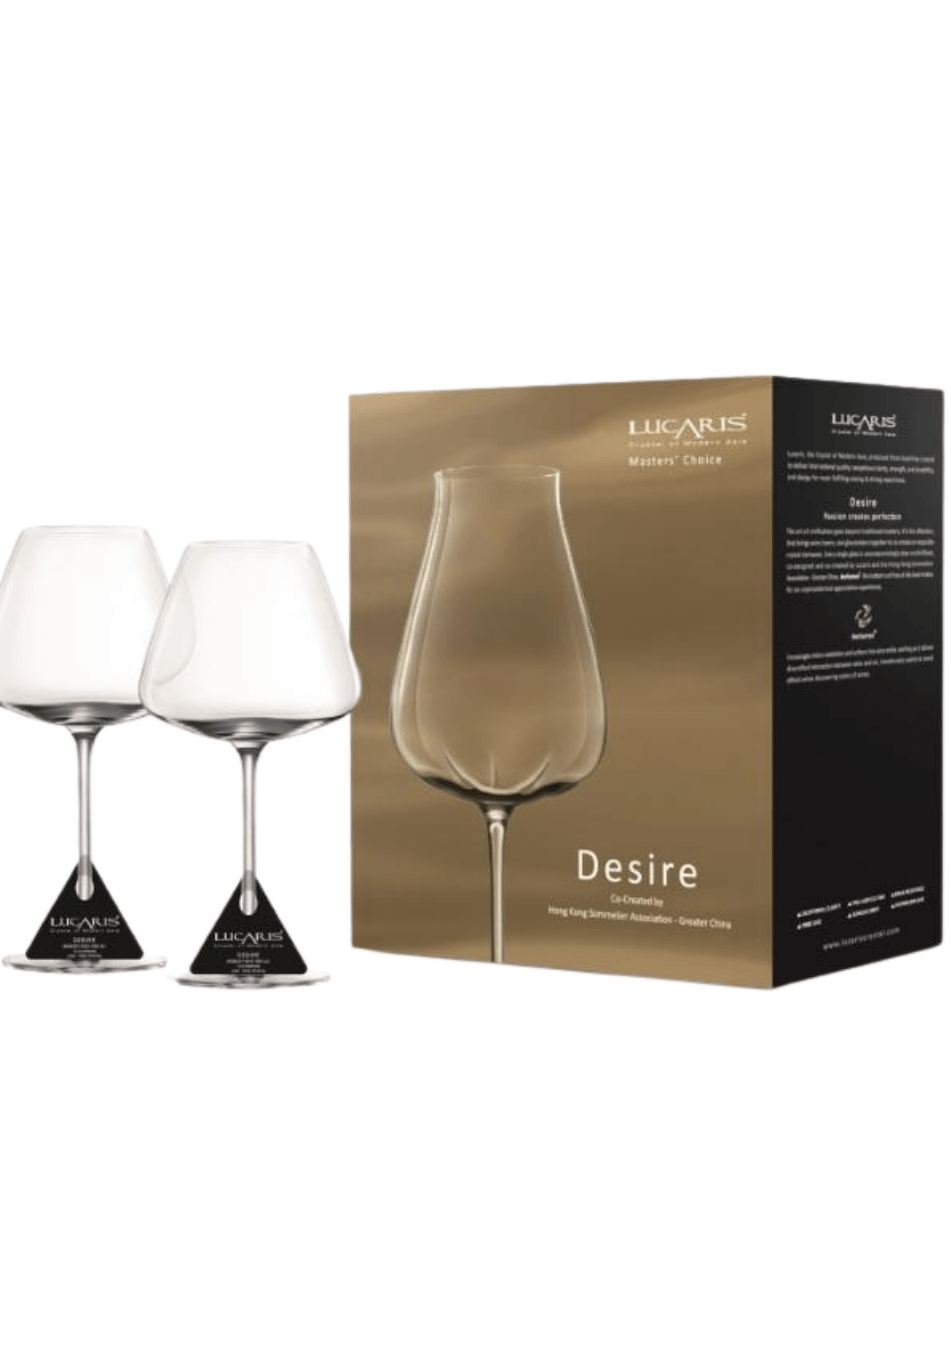 Shop Lucaris Lucaris Desire Elegant Red Wine Glass online at PENTICTON artisanal wine store in Hong Kong. Discover other French wines, promotions, workshops and featured offers at pentictonpacific.com 